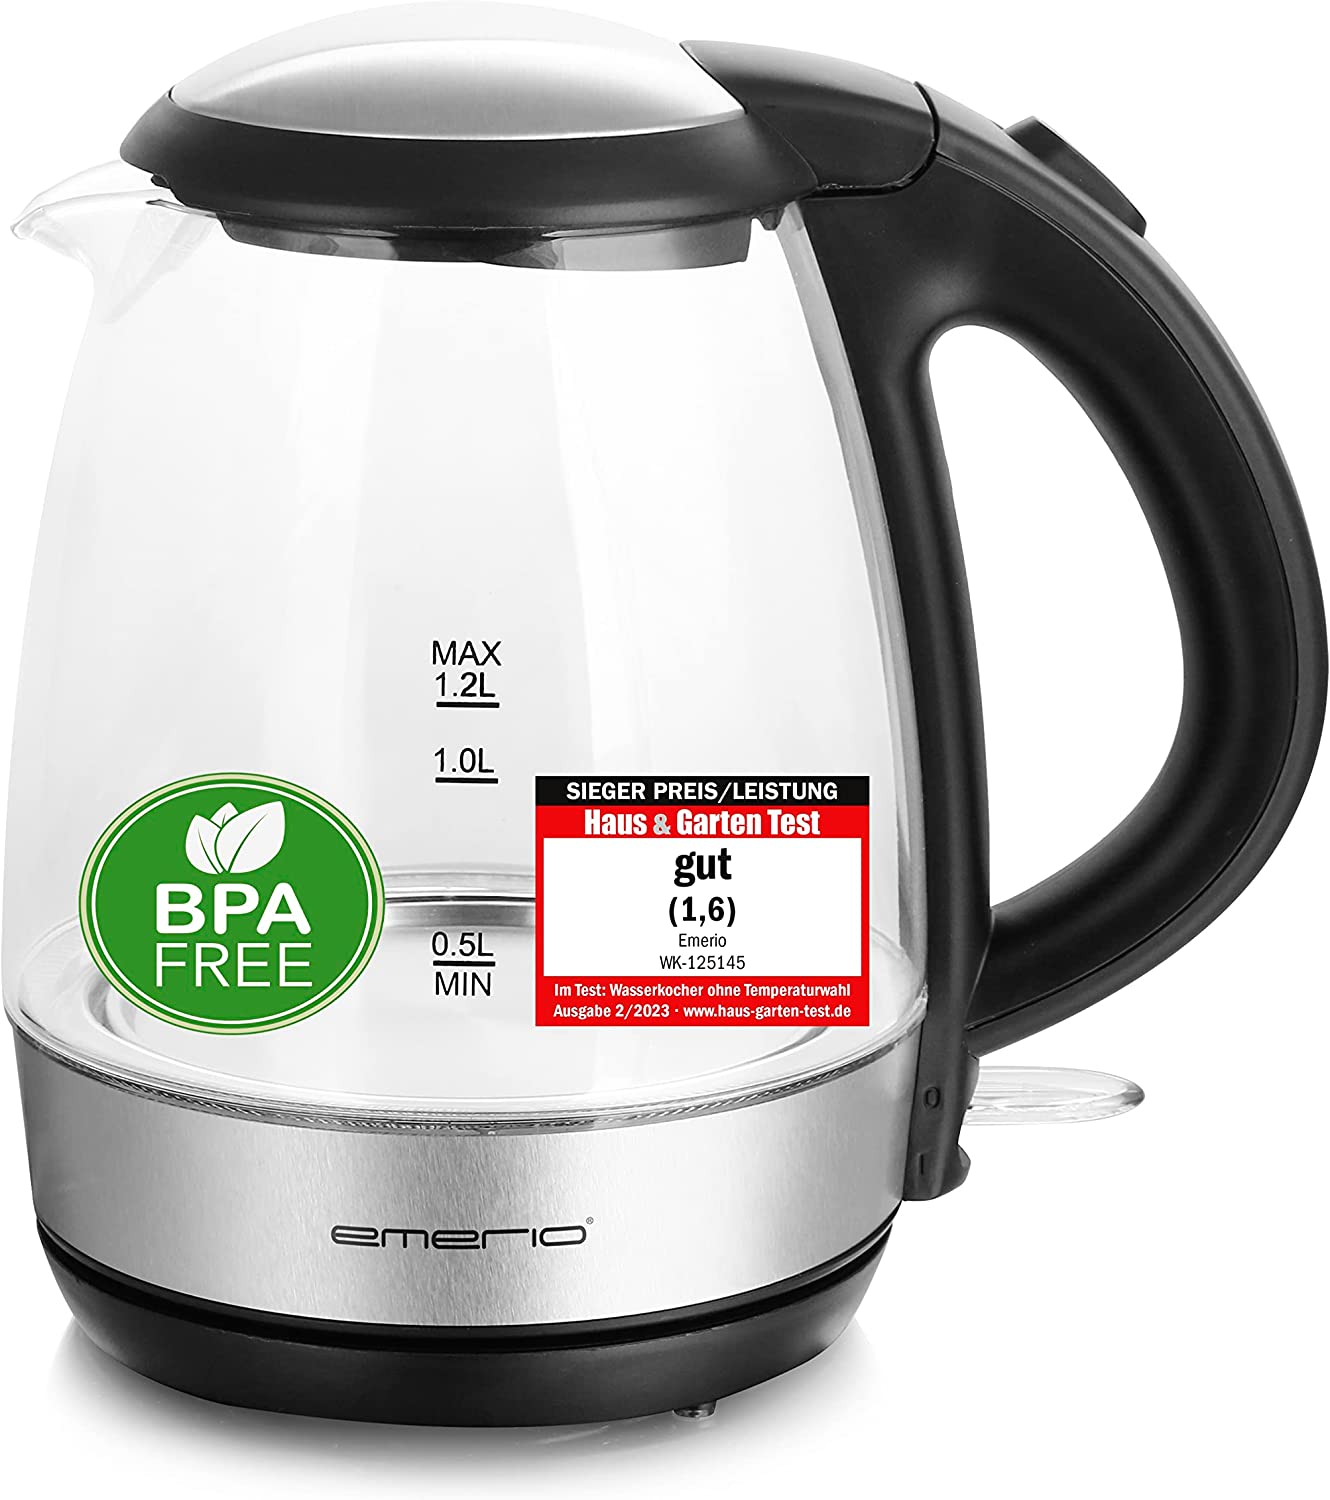 Emerio WK-125145 Glass Kettle, 1.2 Lites, 2200 watt, LED Interior Lighting, 360 ° Base, Borosilicate Glass, BPA-Free, Lid Opening at the Push of a Button, Ideal for Home, Camping Or Office